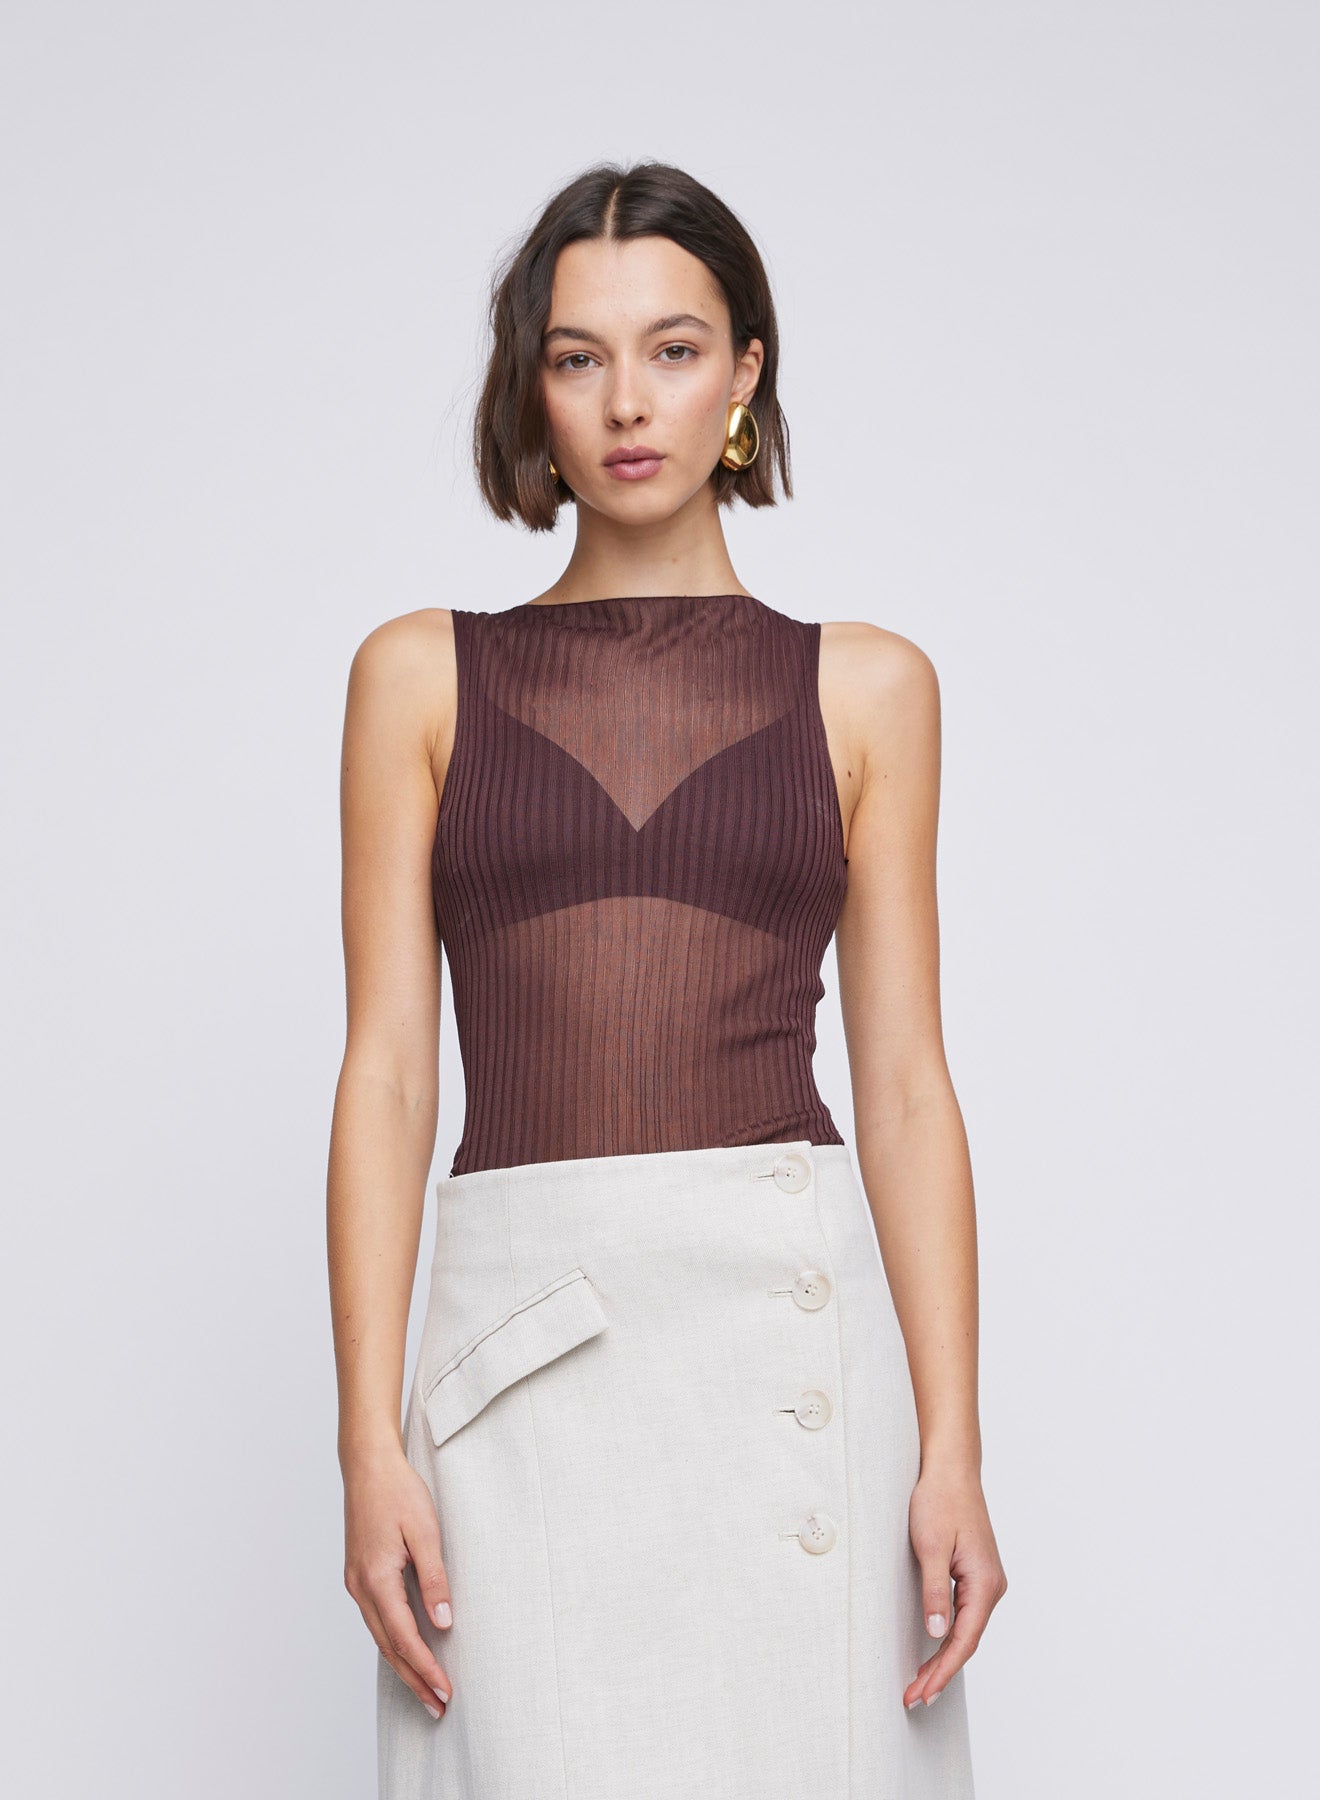 Sleeveless sheer High Neck Knitted Top with cowl neckline. Everyday layering top, sheer top.